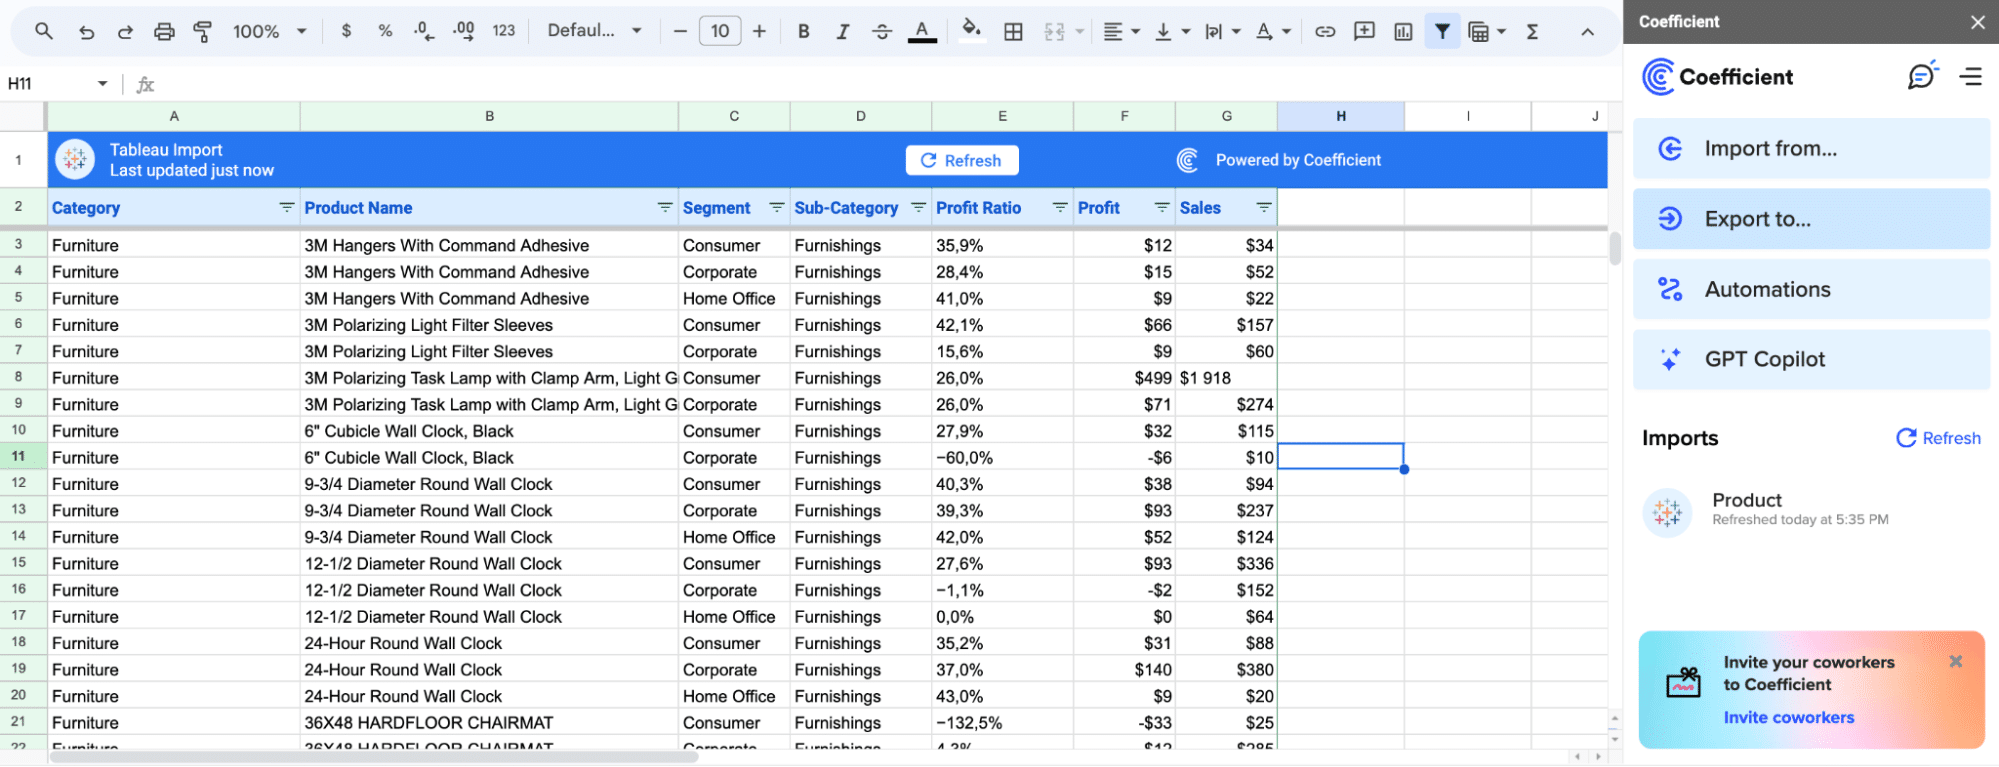 An image showing live Tableau data in Google Sheets, imported in seconds and without code by Coefficient.